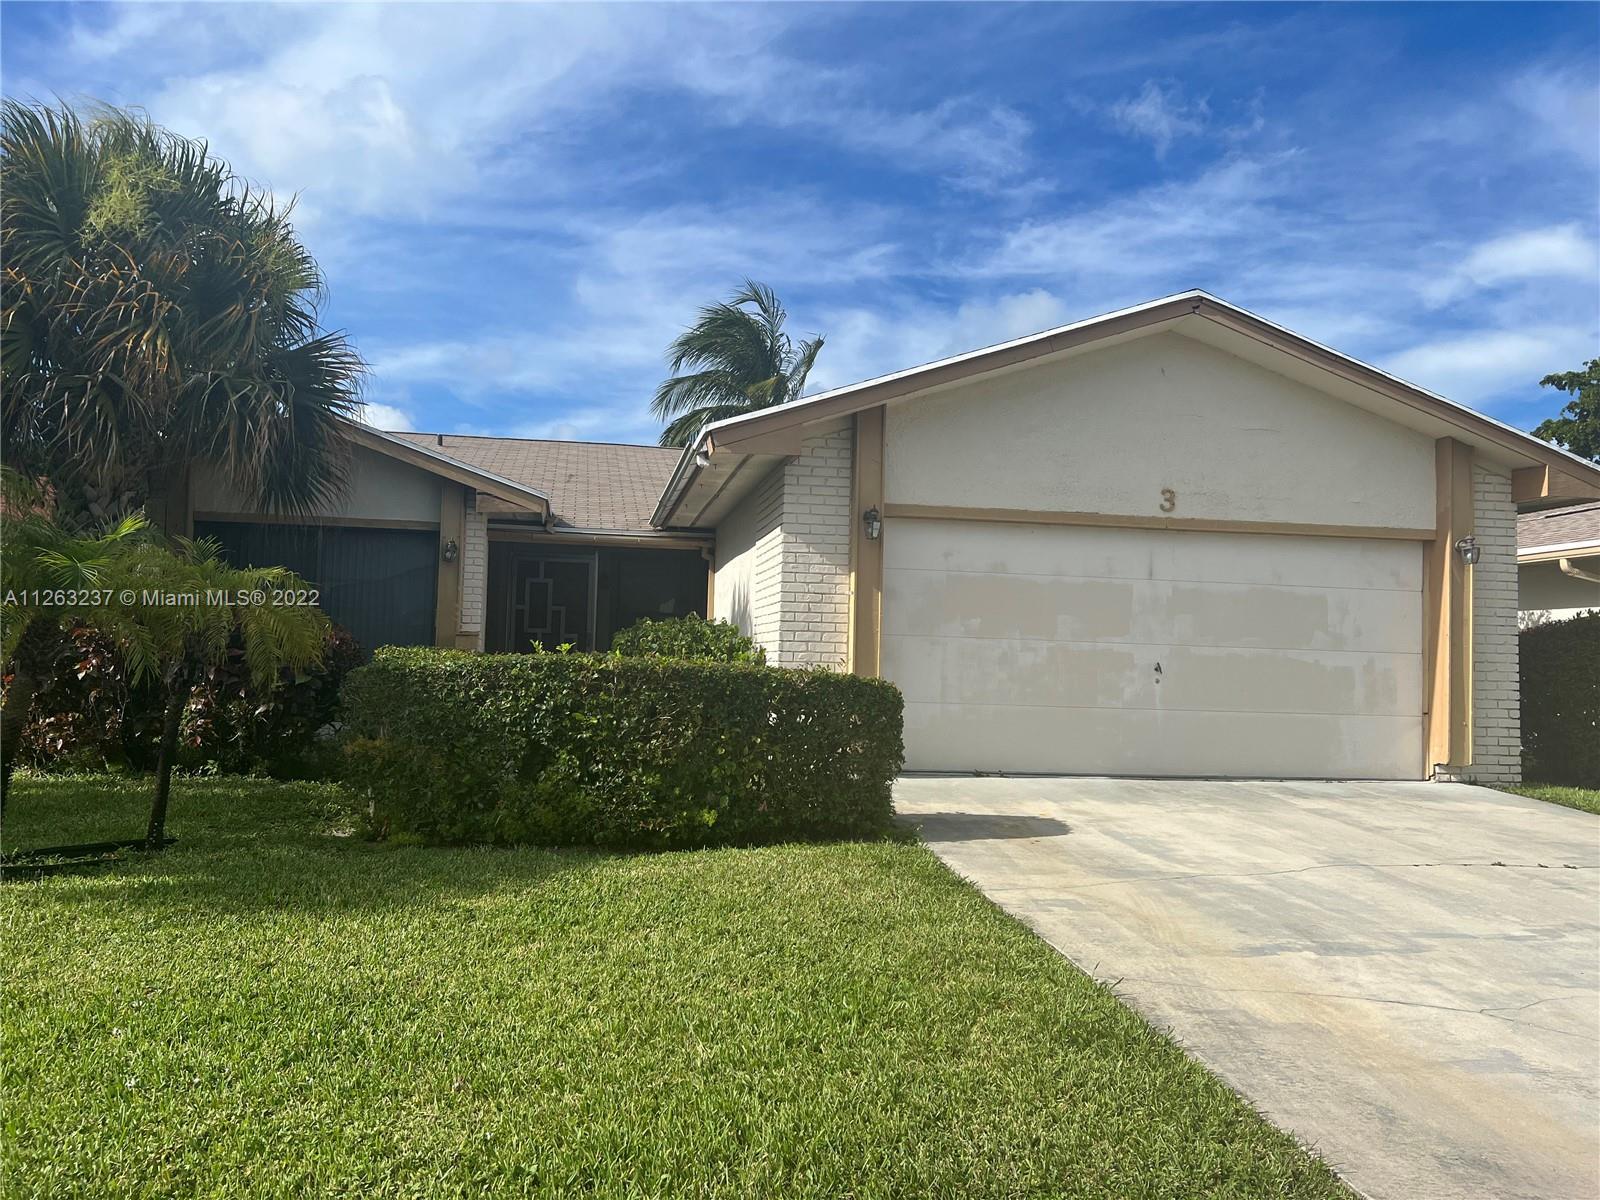 Here's a fantastic opportunity to own a 4/2 in a great community, Boynton Lakes!  The home is spacio